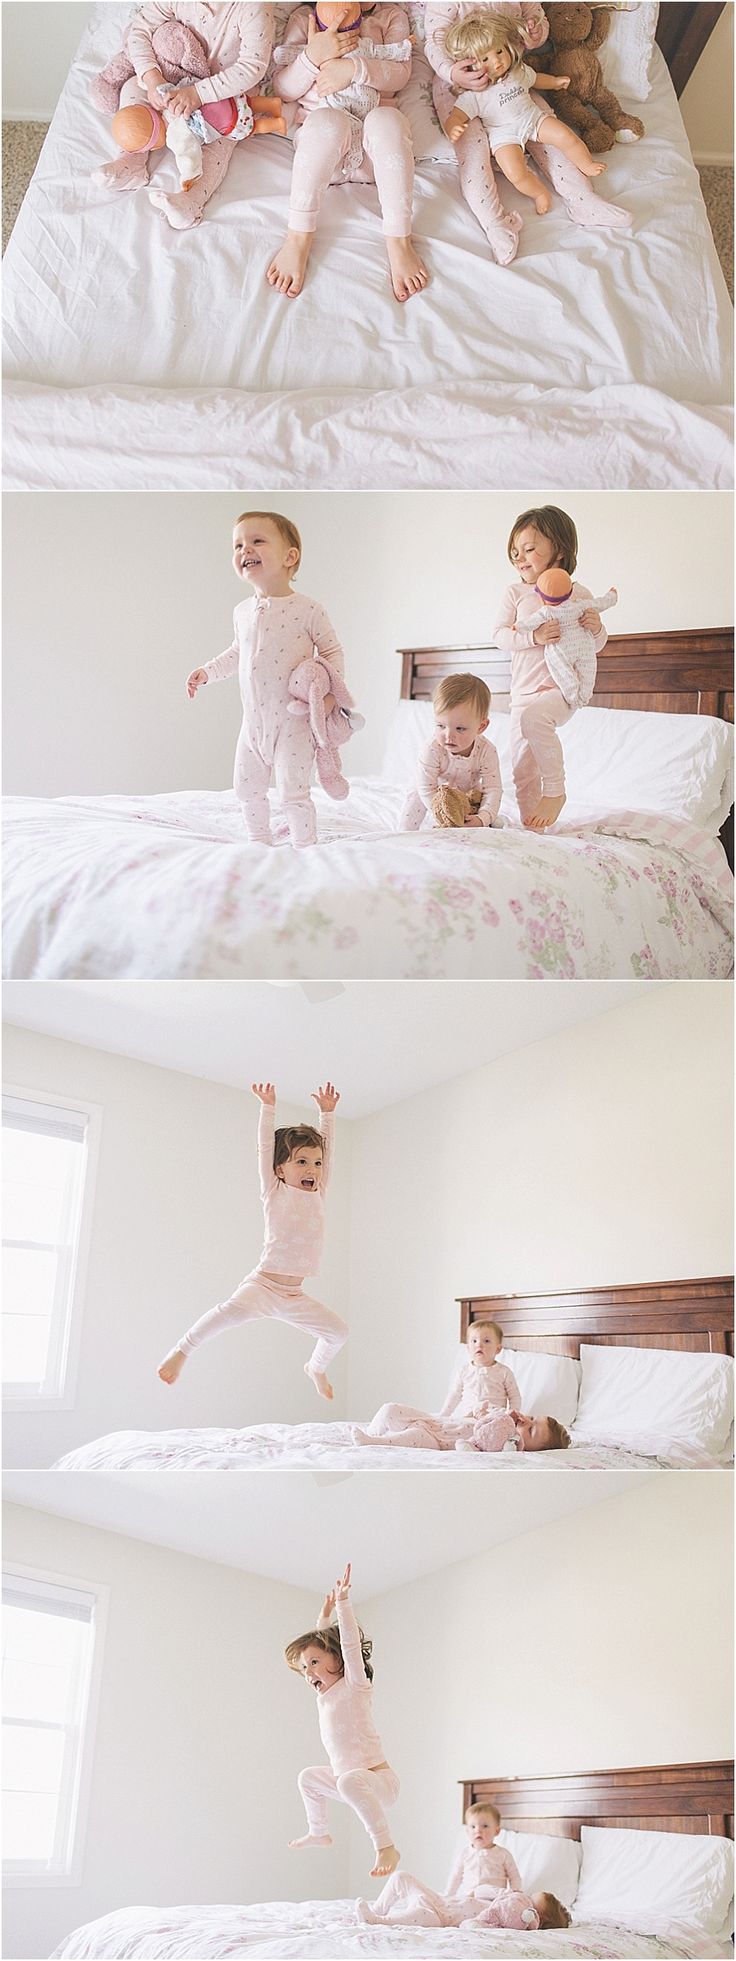 lifestyle photos of 3 kids jumping on bed by Allison Corrin